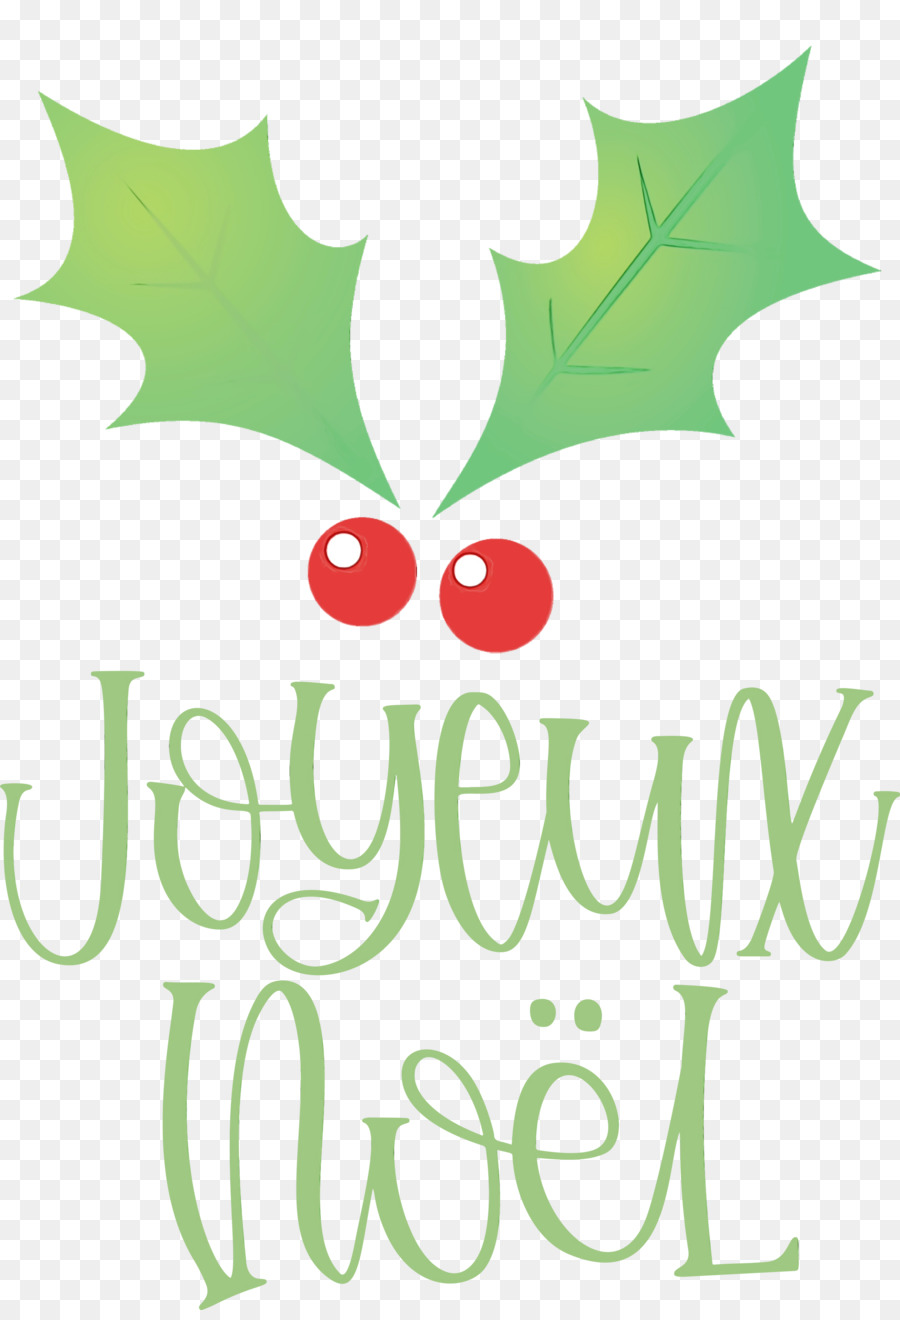 christmas archives logo holiday text